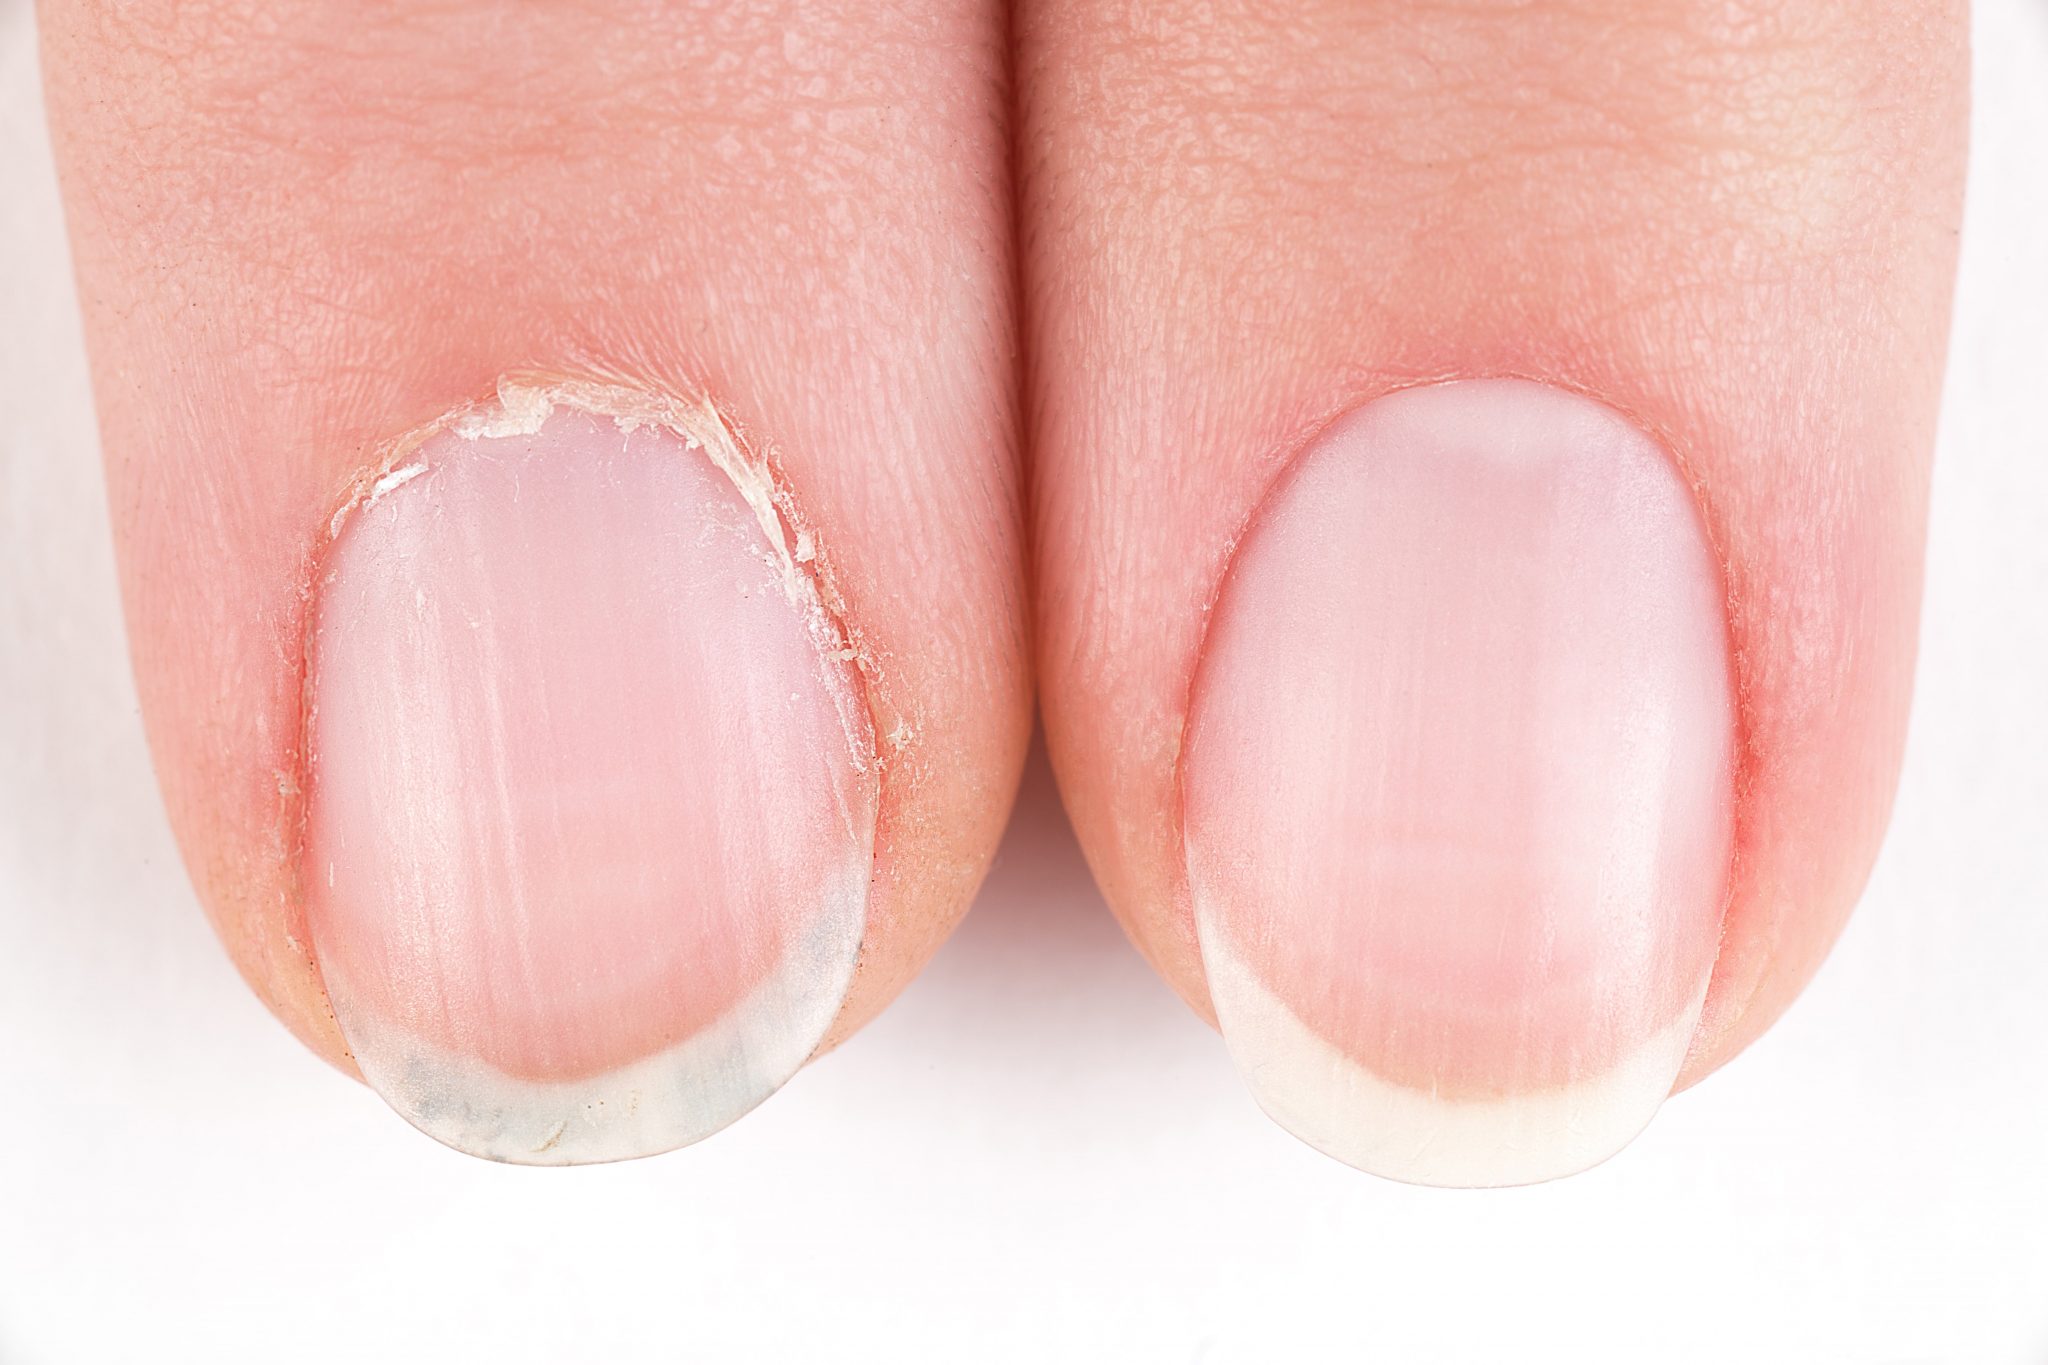 How to heal cuticles overnight?